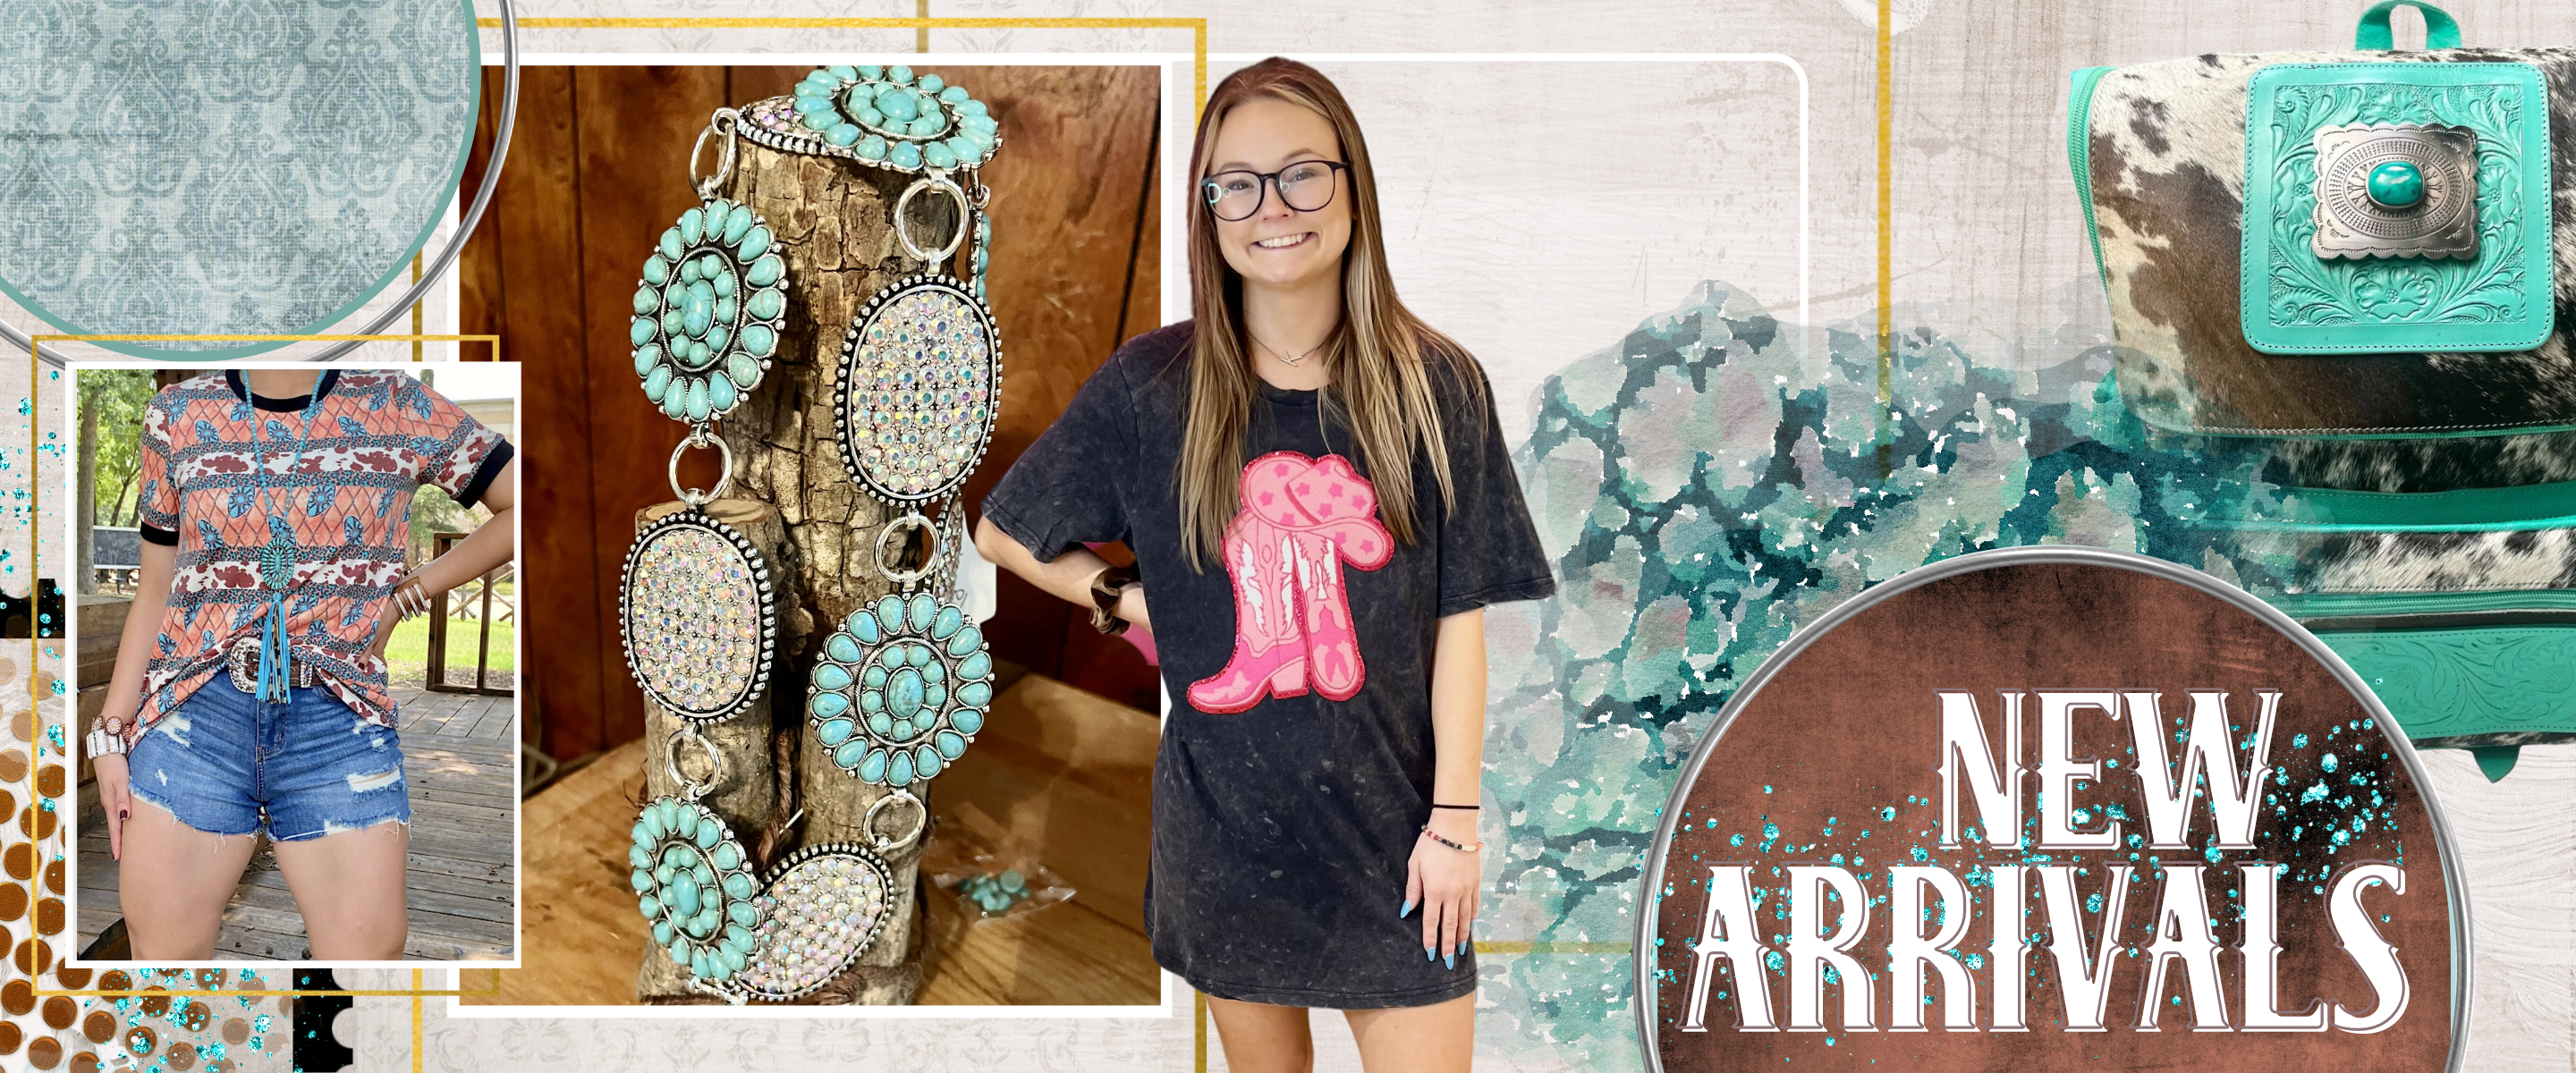 Check Out the Latest New Arrivals at Deadwood South Boutique | Women's Fashion Boutique in Henderson, TX